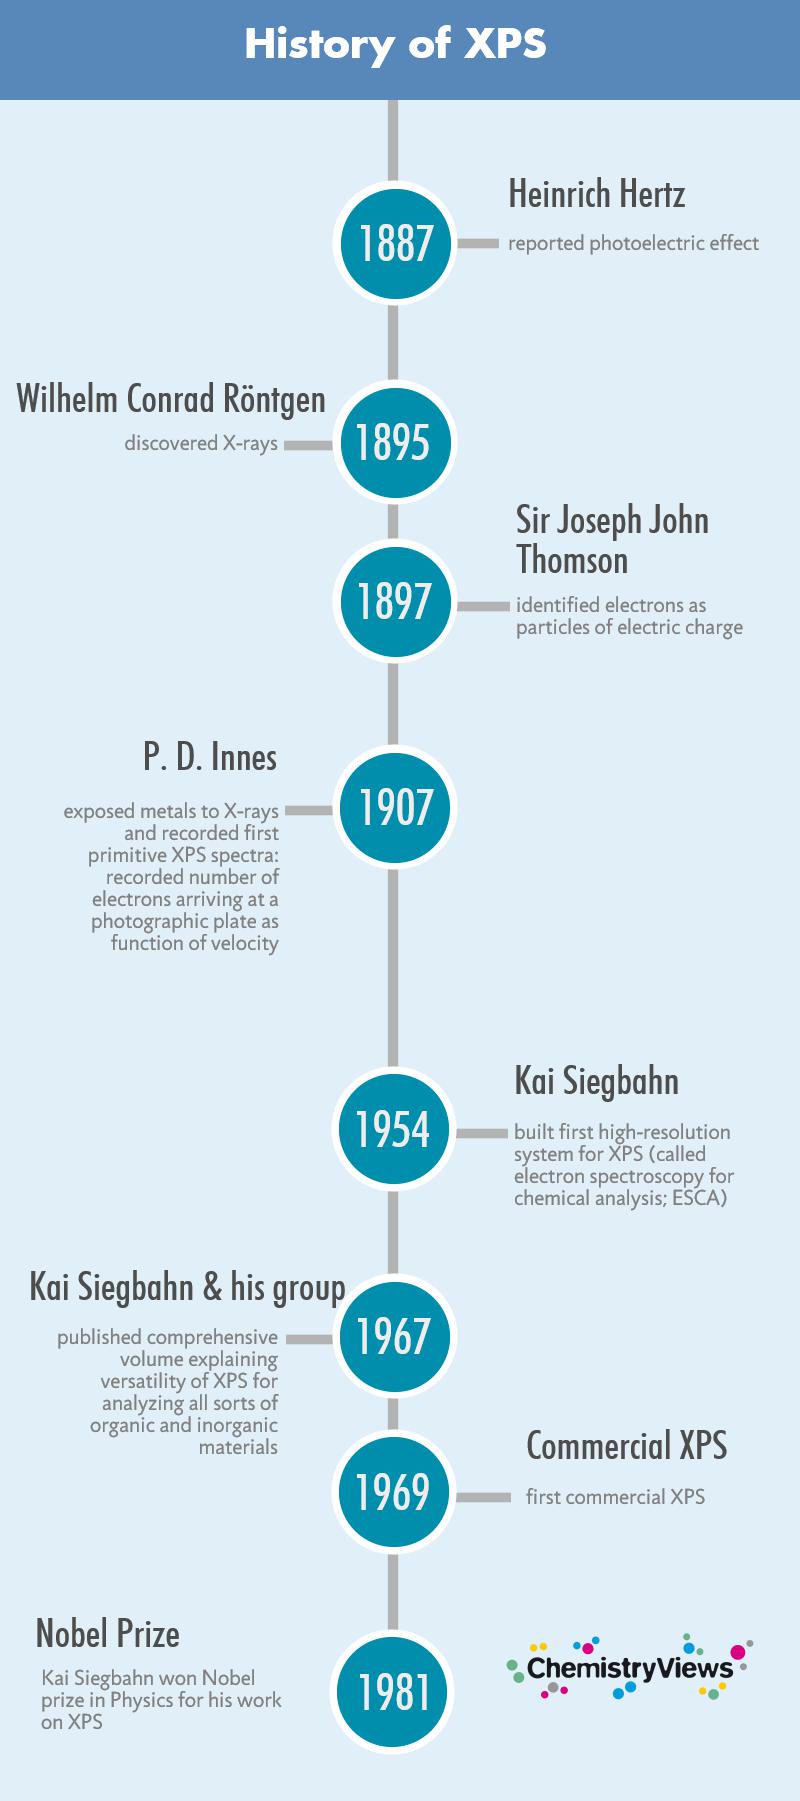 History of XPS ; ChemistryViews.org